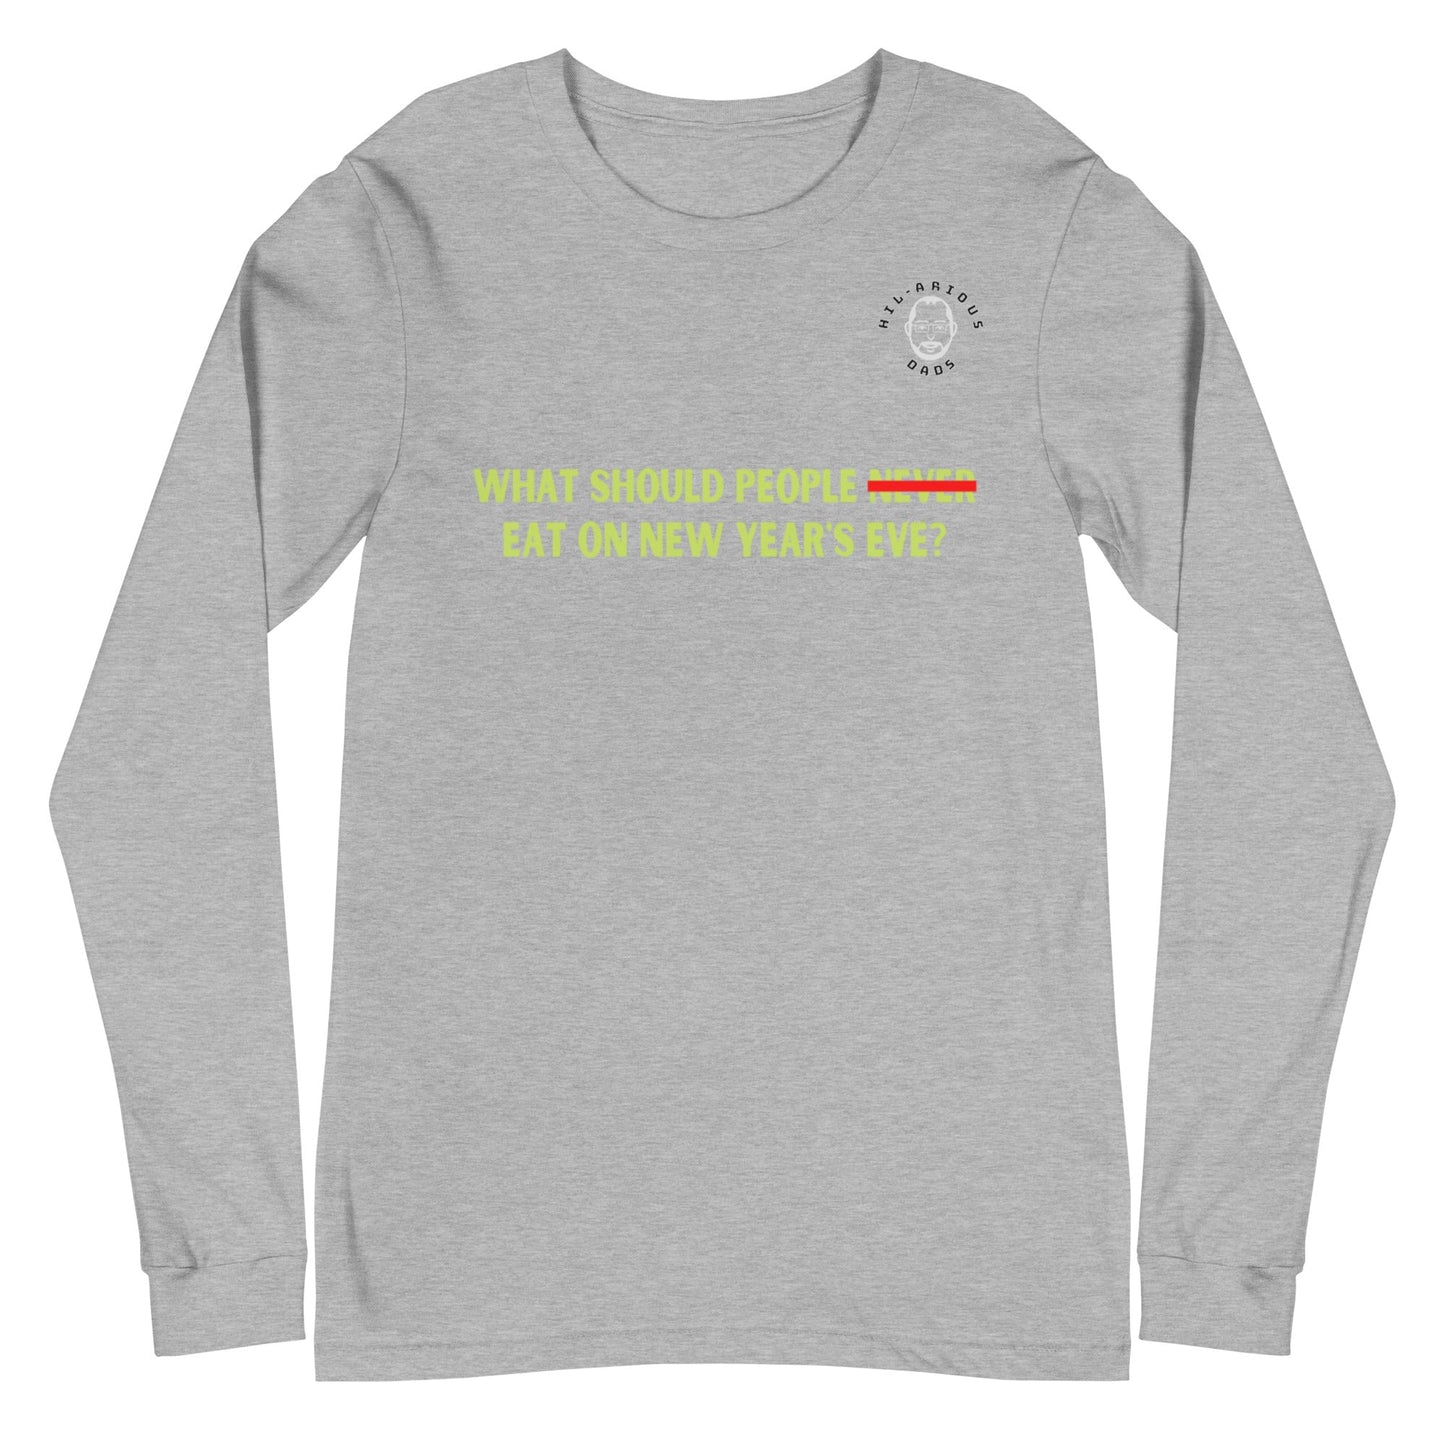 What should people NEVER eat on New Year's Eve?-Long Sleeve Tee - Hil-arious Dads